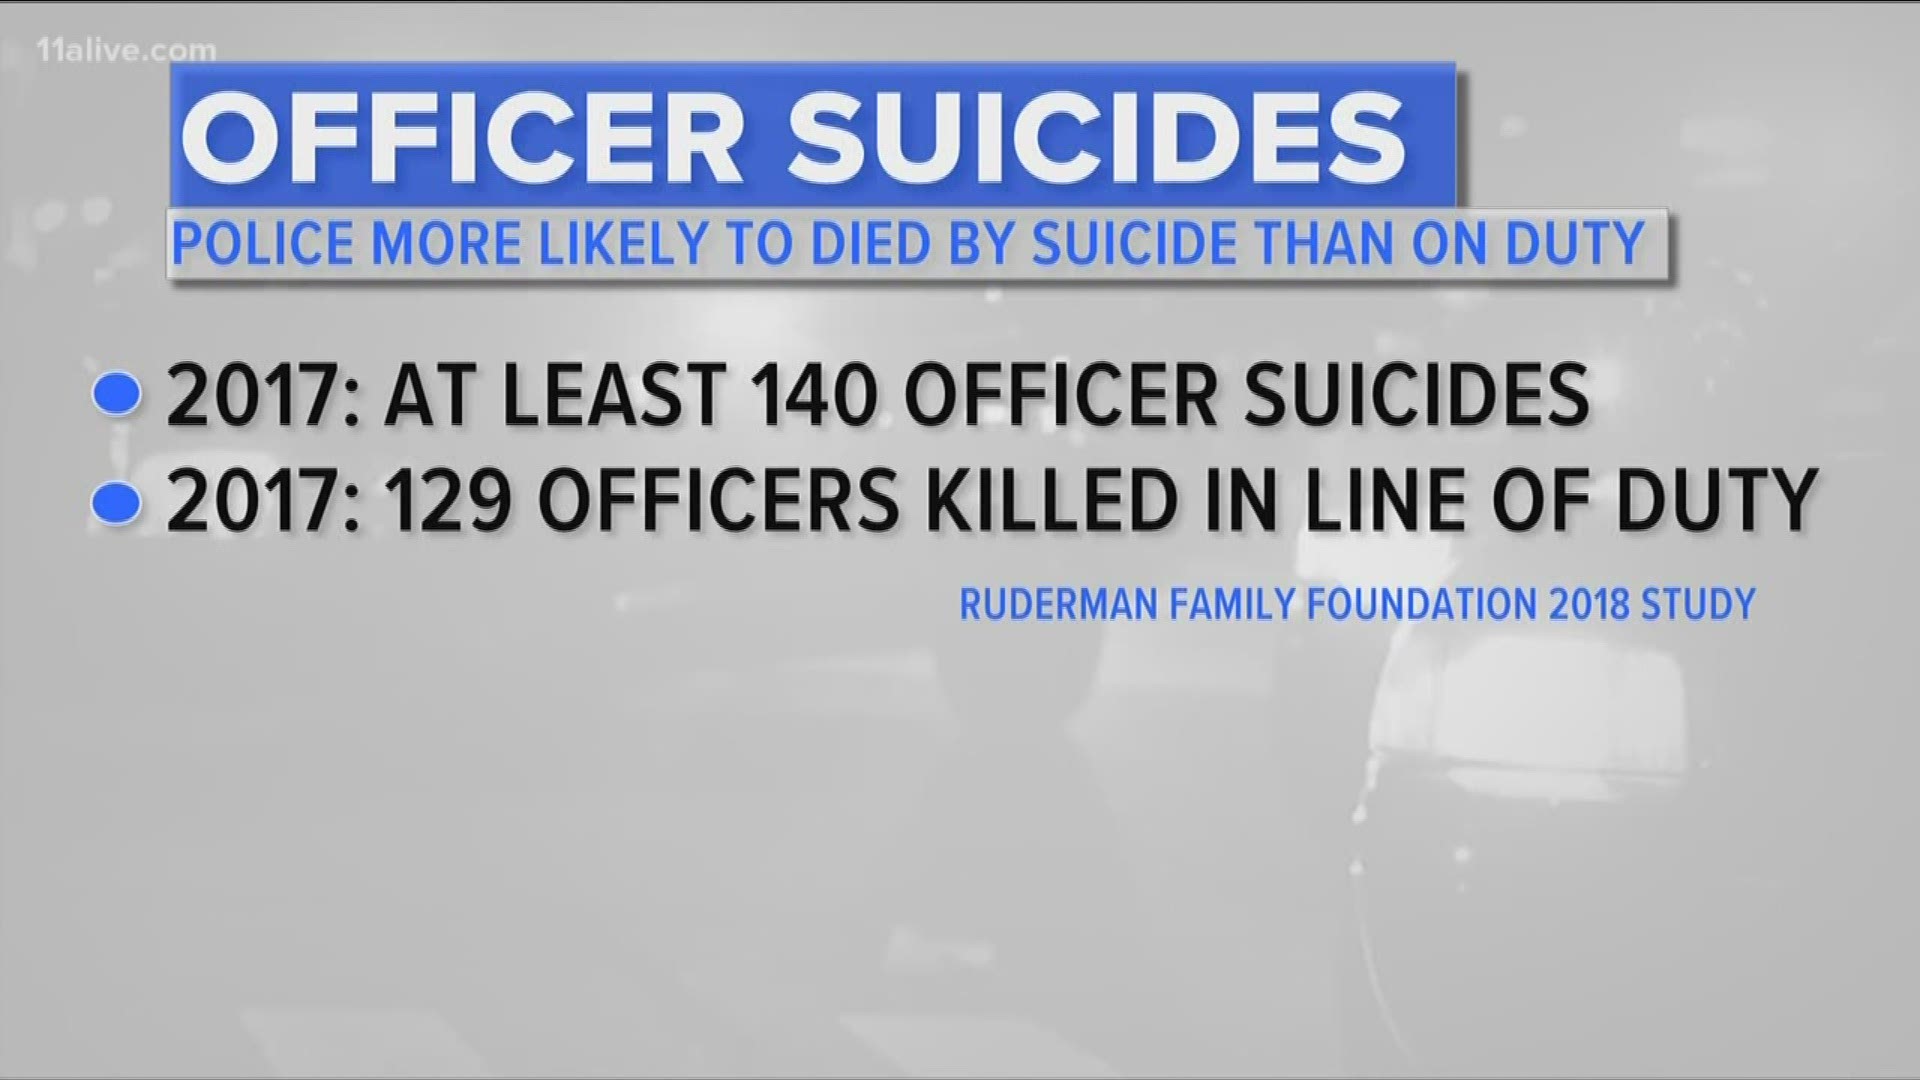 Suicide claims more officers' lives annually than violence in the line of duty.